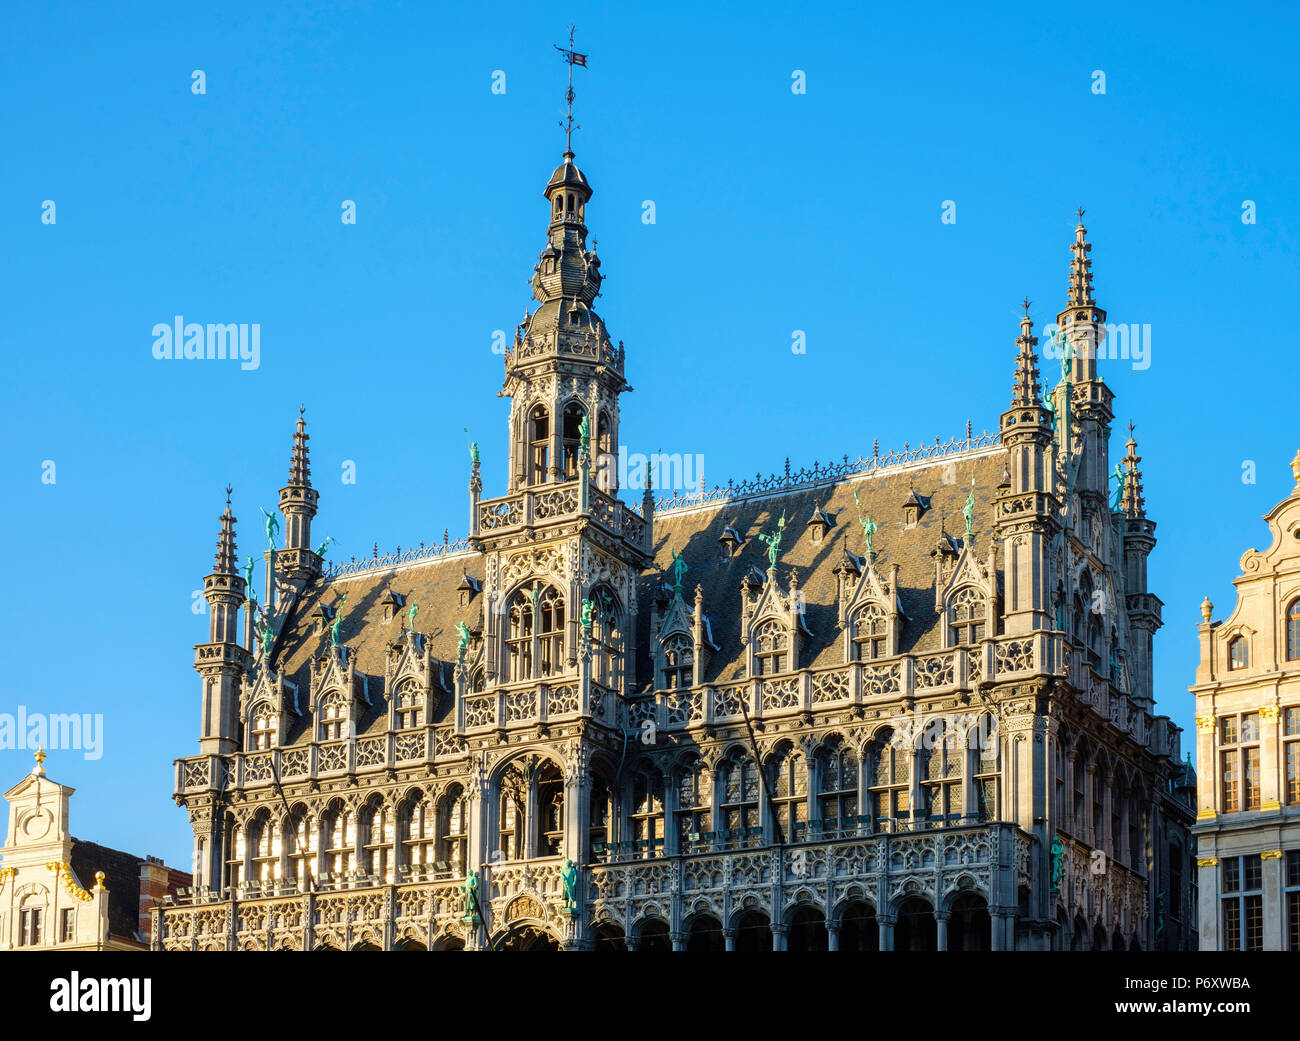 Belgium, Brussels (Bruxelles). Maison du Roi (King's House), or Broodhuis (Breadhouse) on the Grand Place (Grote Markt), UNESCO World Heritage Site. Stock Photo